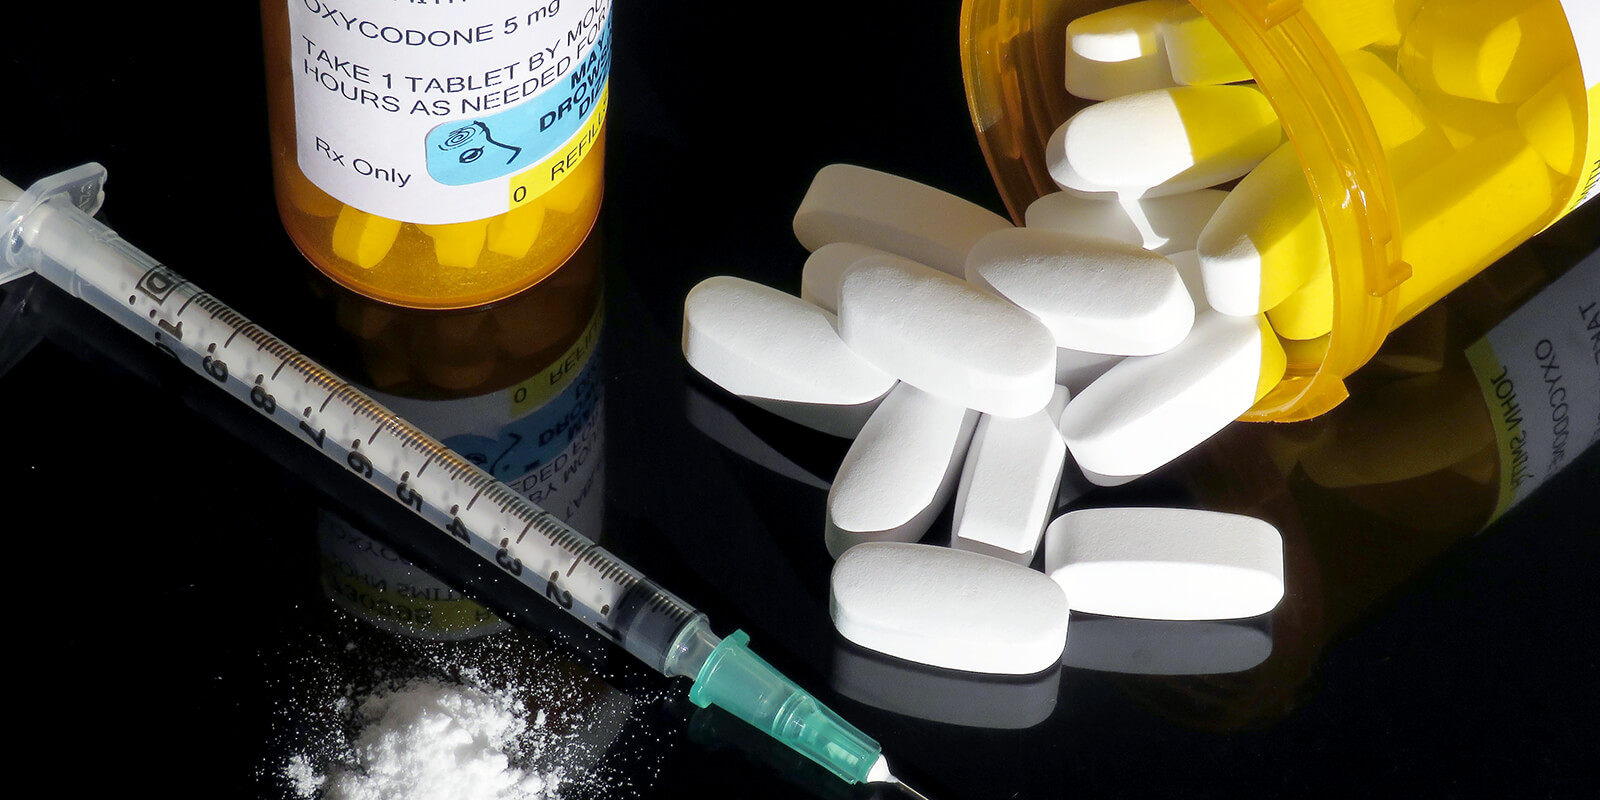 AFSCME-backed bill seeks to overcome the nation’s addiction crisis